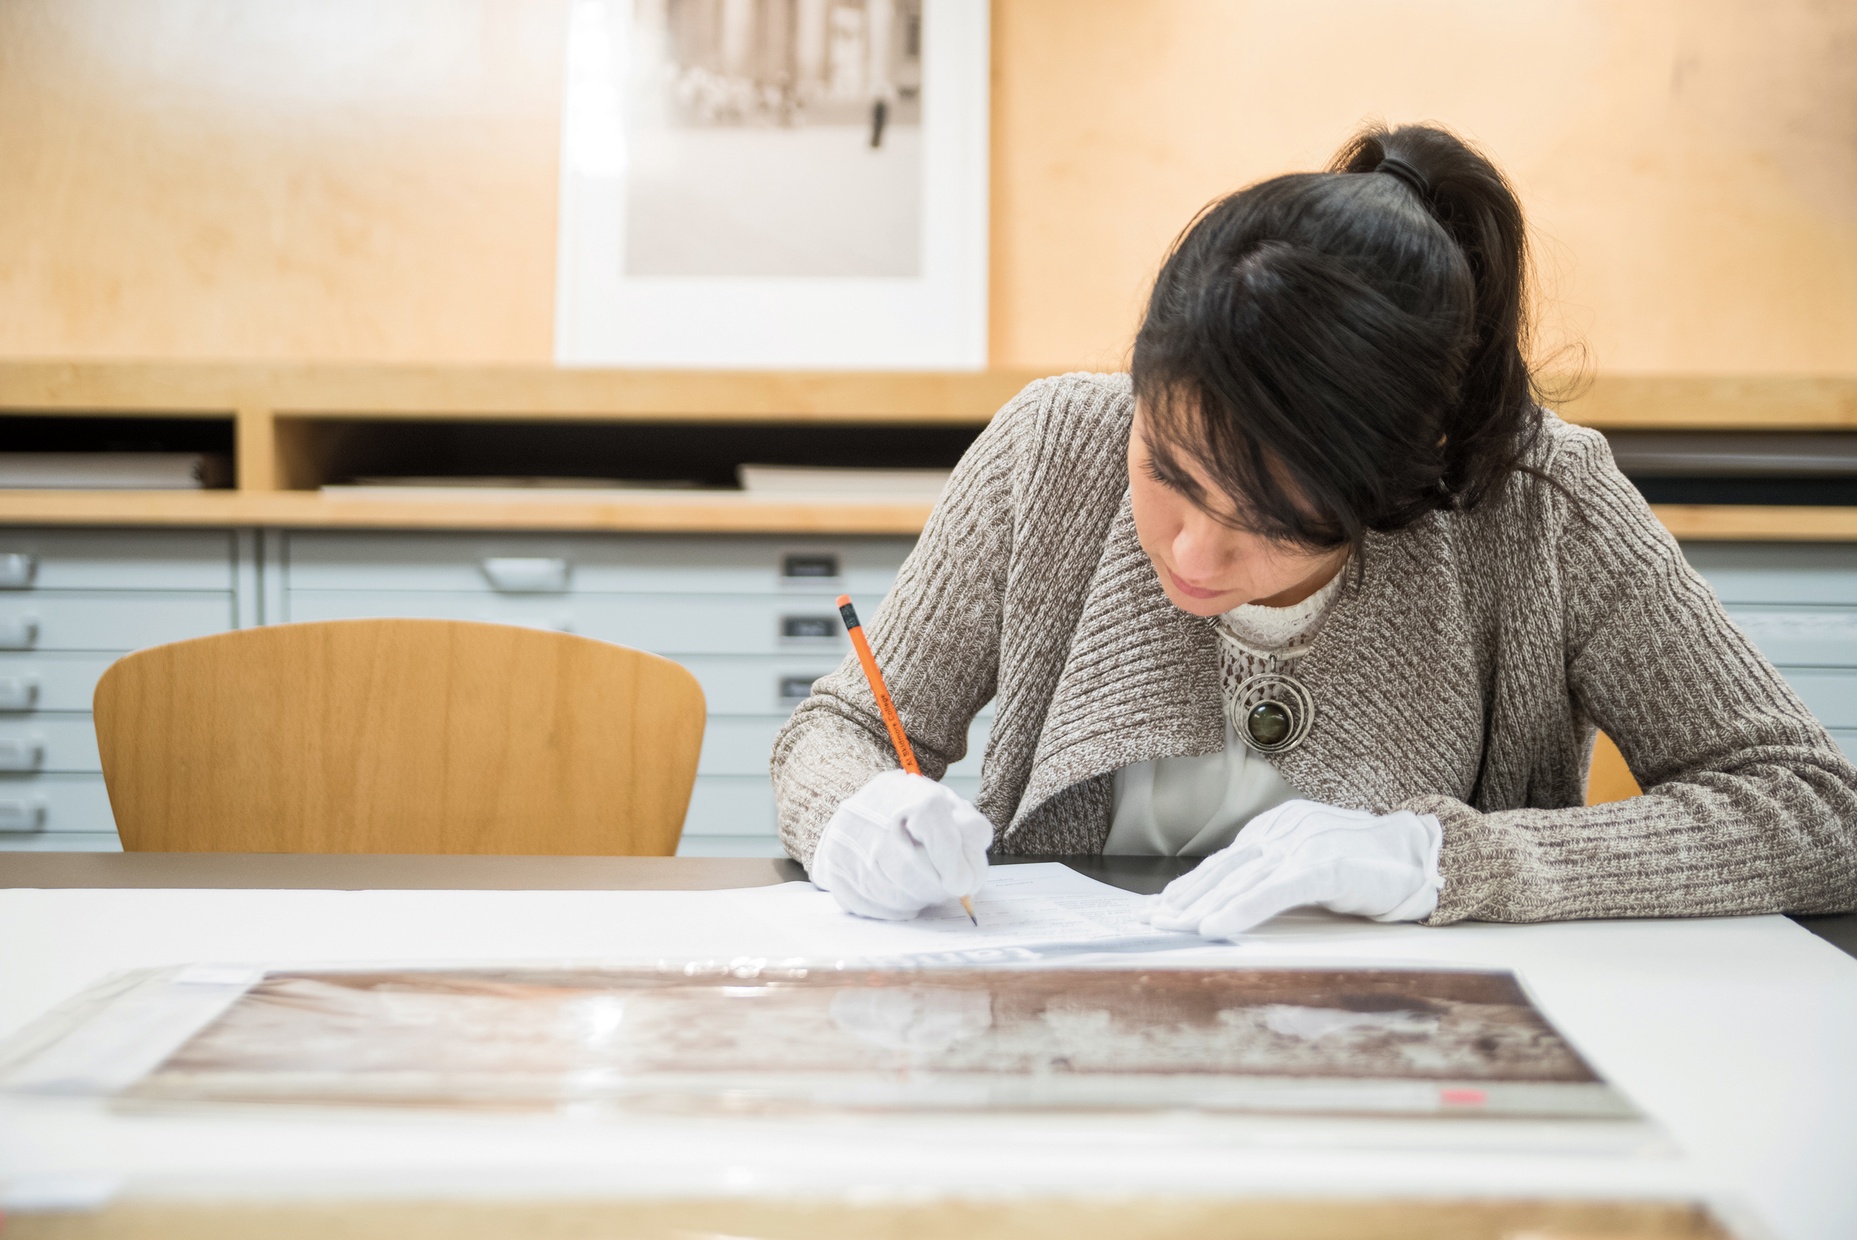 Ana-Joel Falcon-Wiebe, a light-skinned female, takes notes with a pencil on a piece in the museum's collection while wearing white gloves.